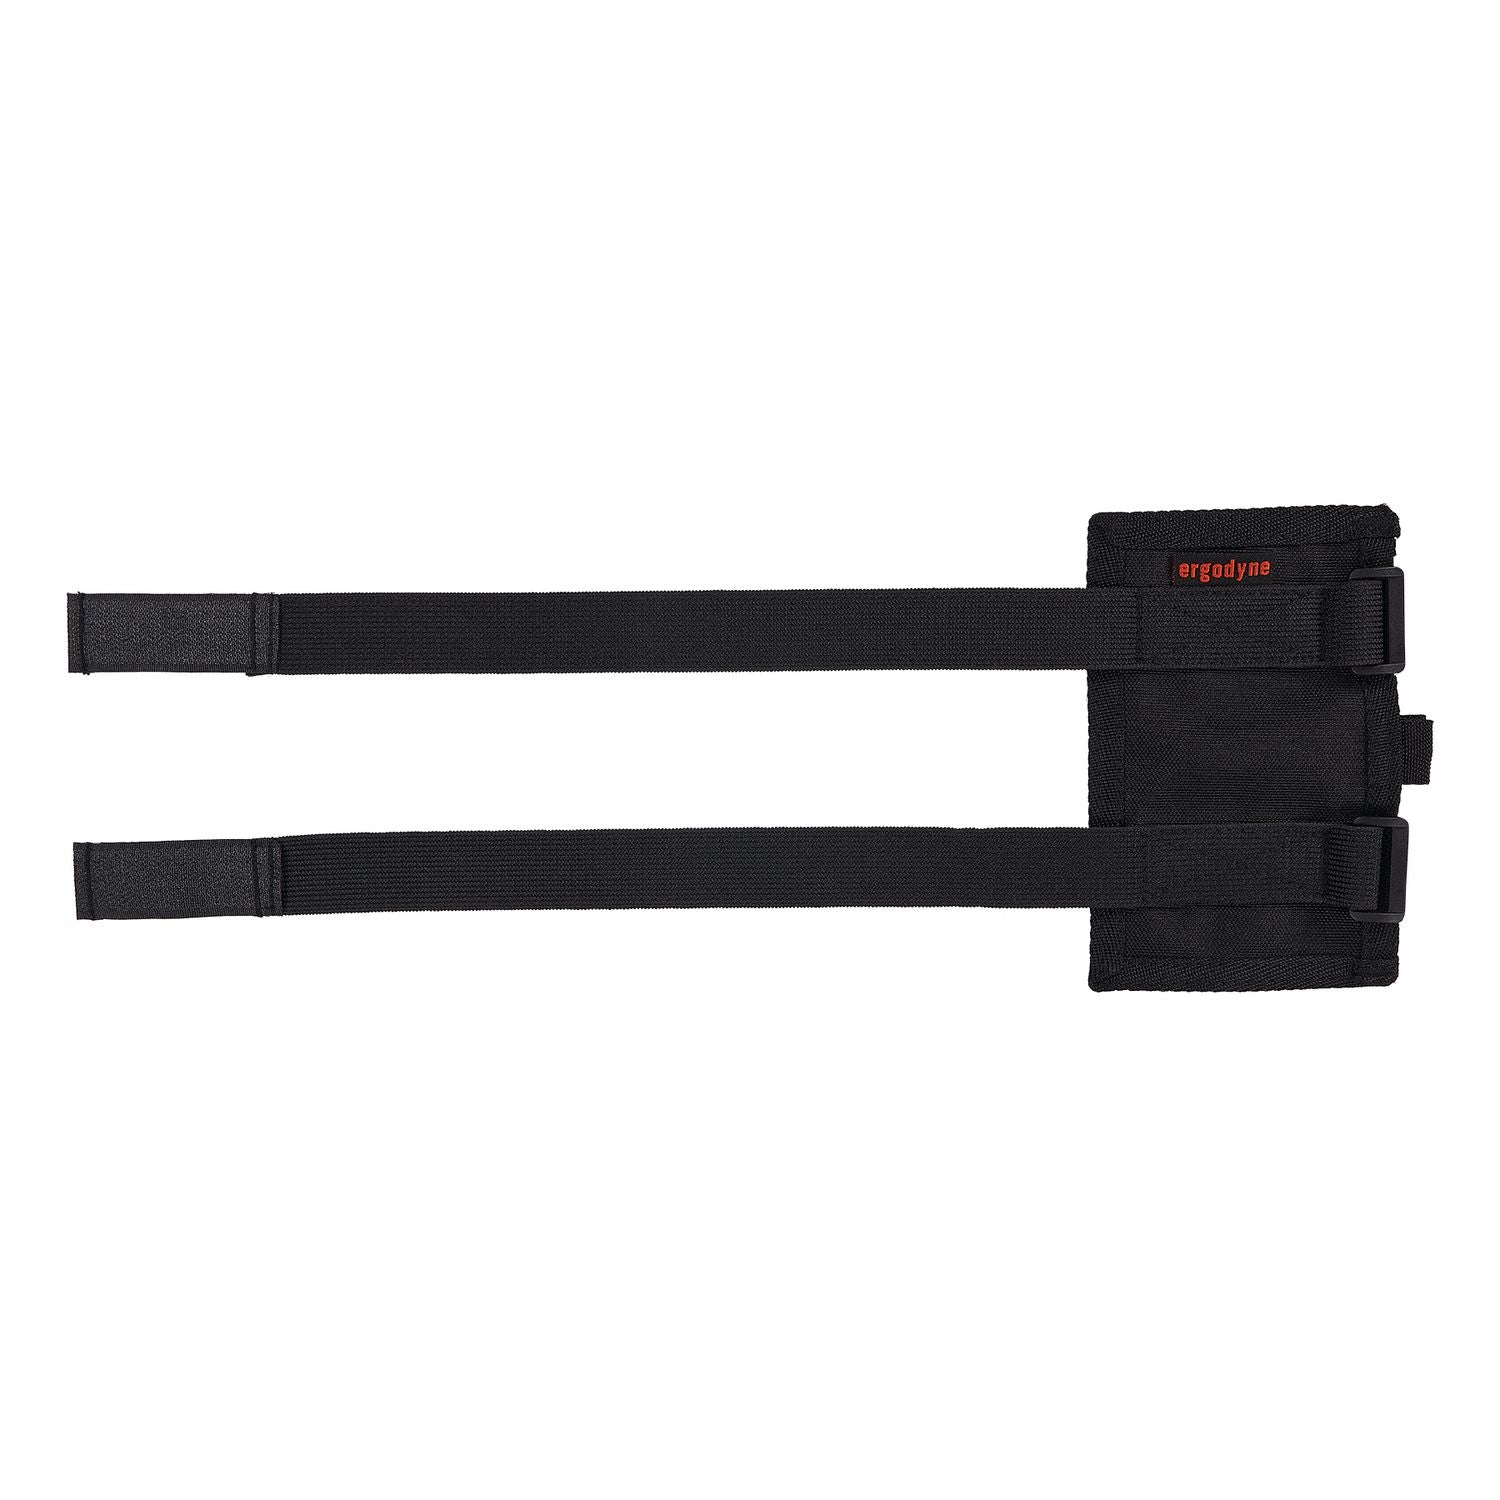 squids-3390-dual-band-arm-id-badge-holder-w-hook-loop-vertical-black-375-x-575-275-x-475-insert-ships-in-1-3-bus-days_ego19966 - 2